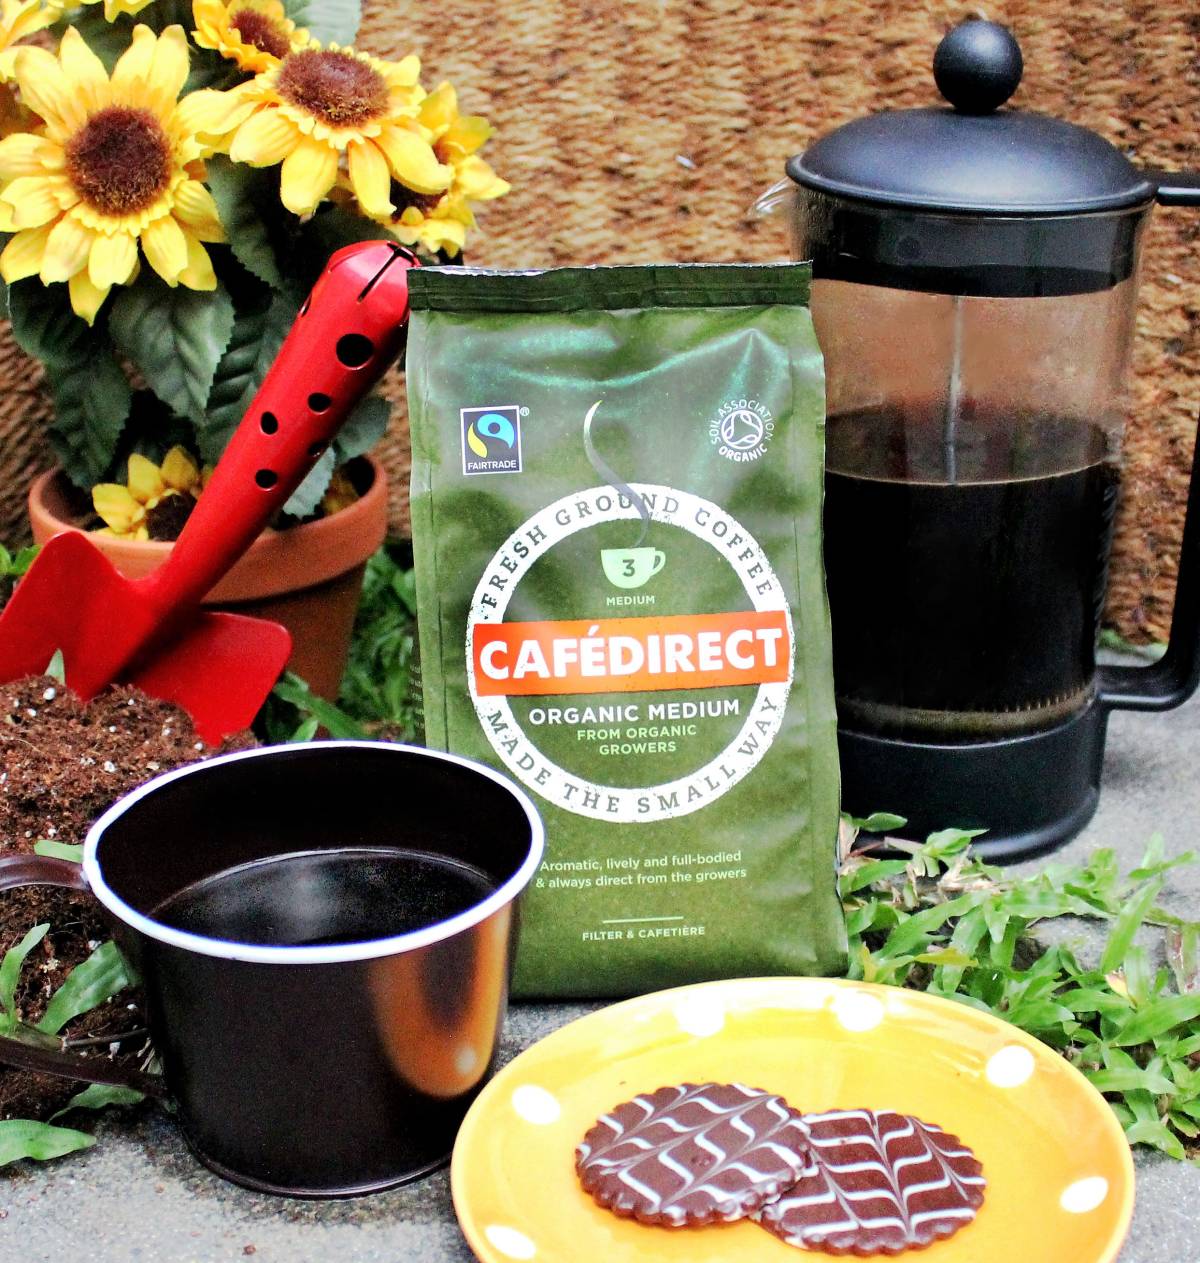 CAFÉDIRECT ORGANIC MEDIUM ROAST COFFEE BRINGS THE BEST OF NATURE’S NATURAL HARVEST TO COFFEE LOVERS